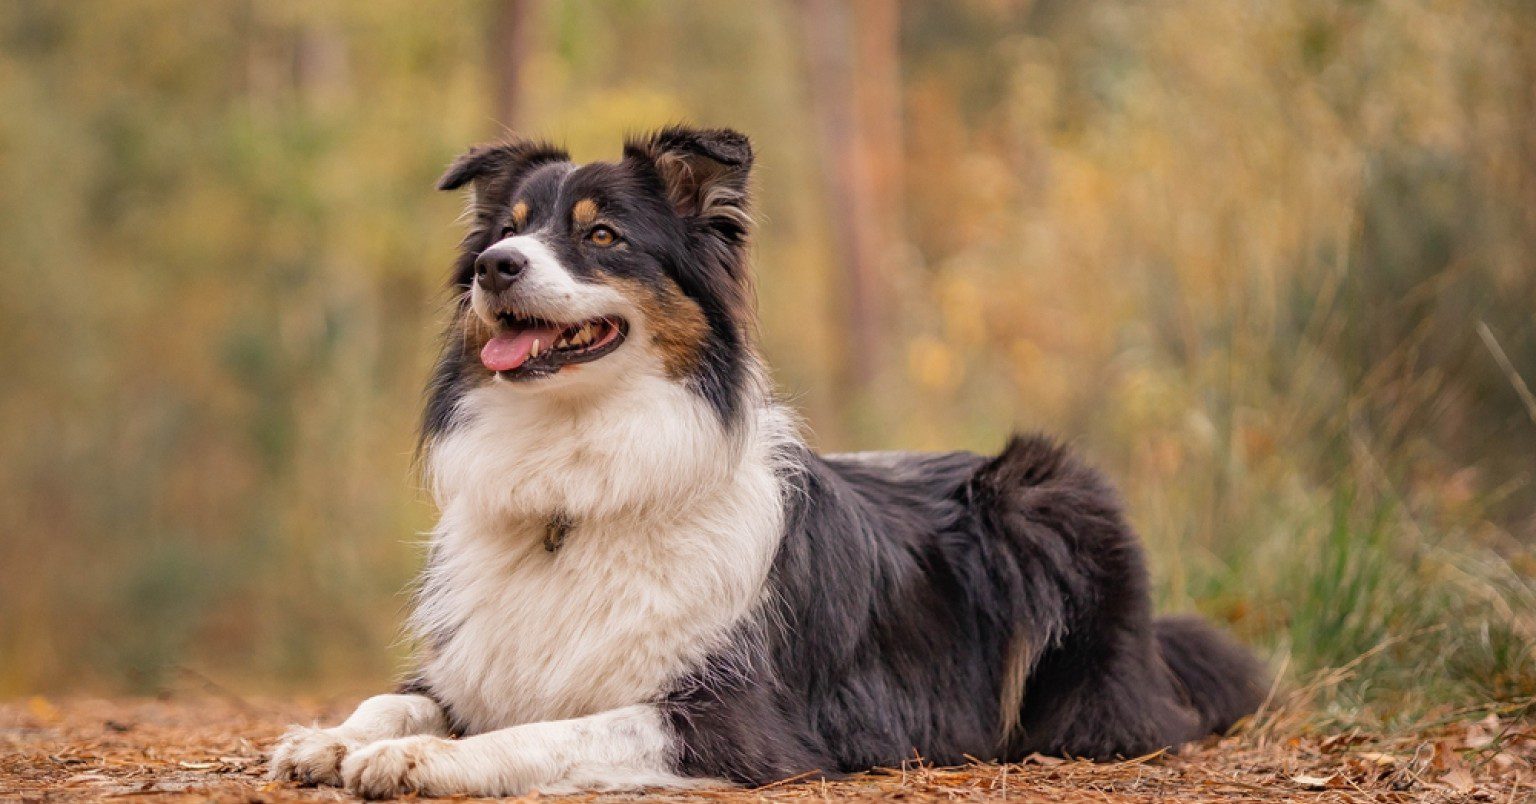 Photograph of an Australian Shepherd in the forest